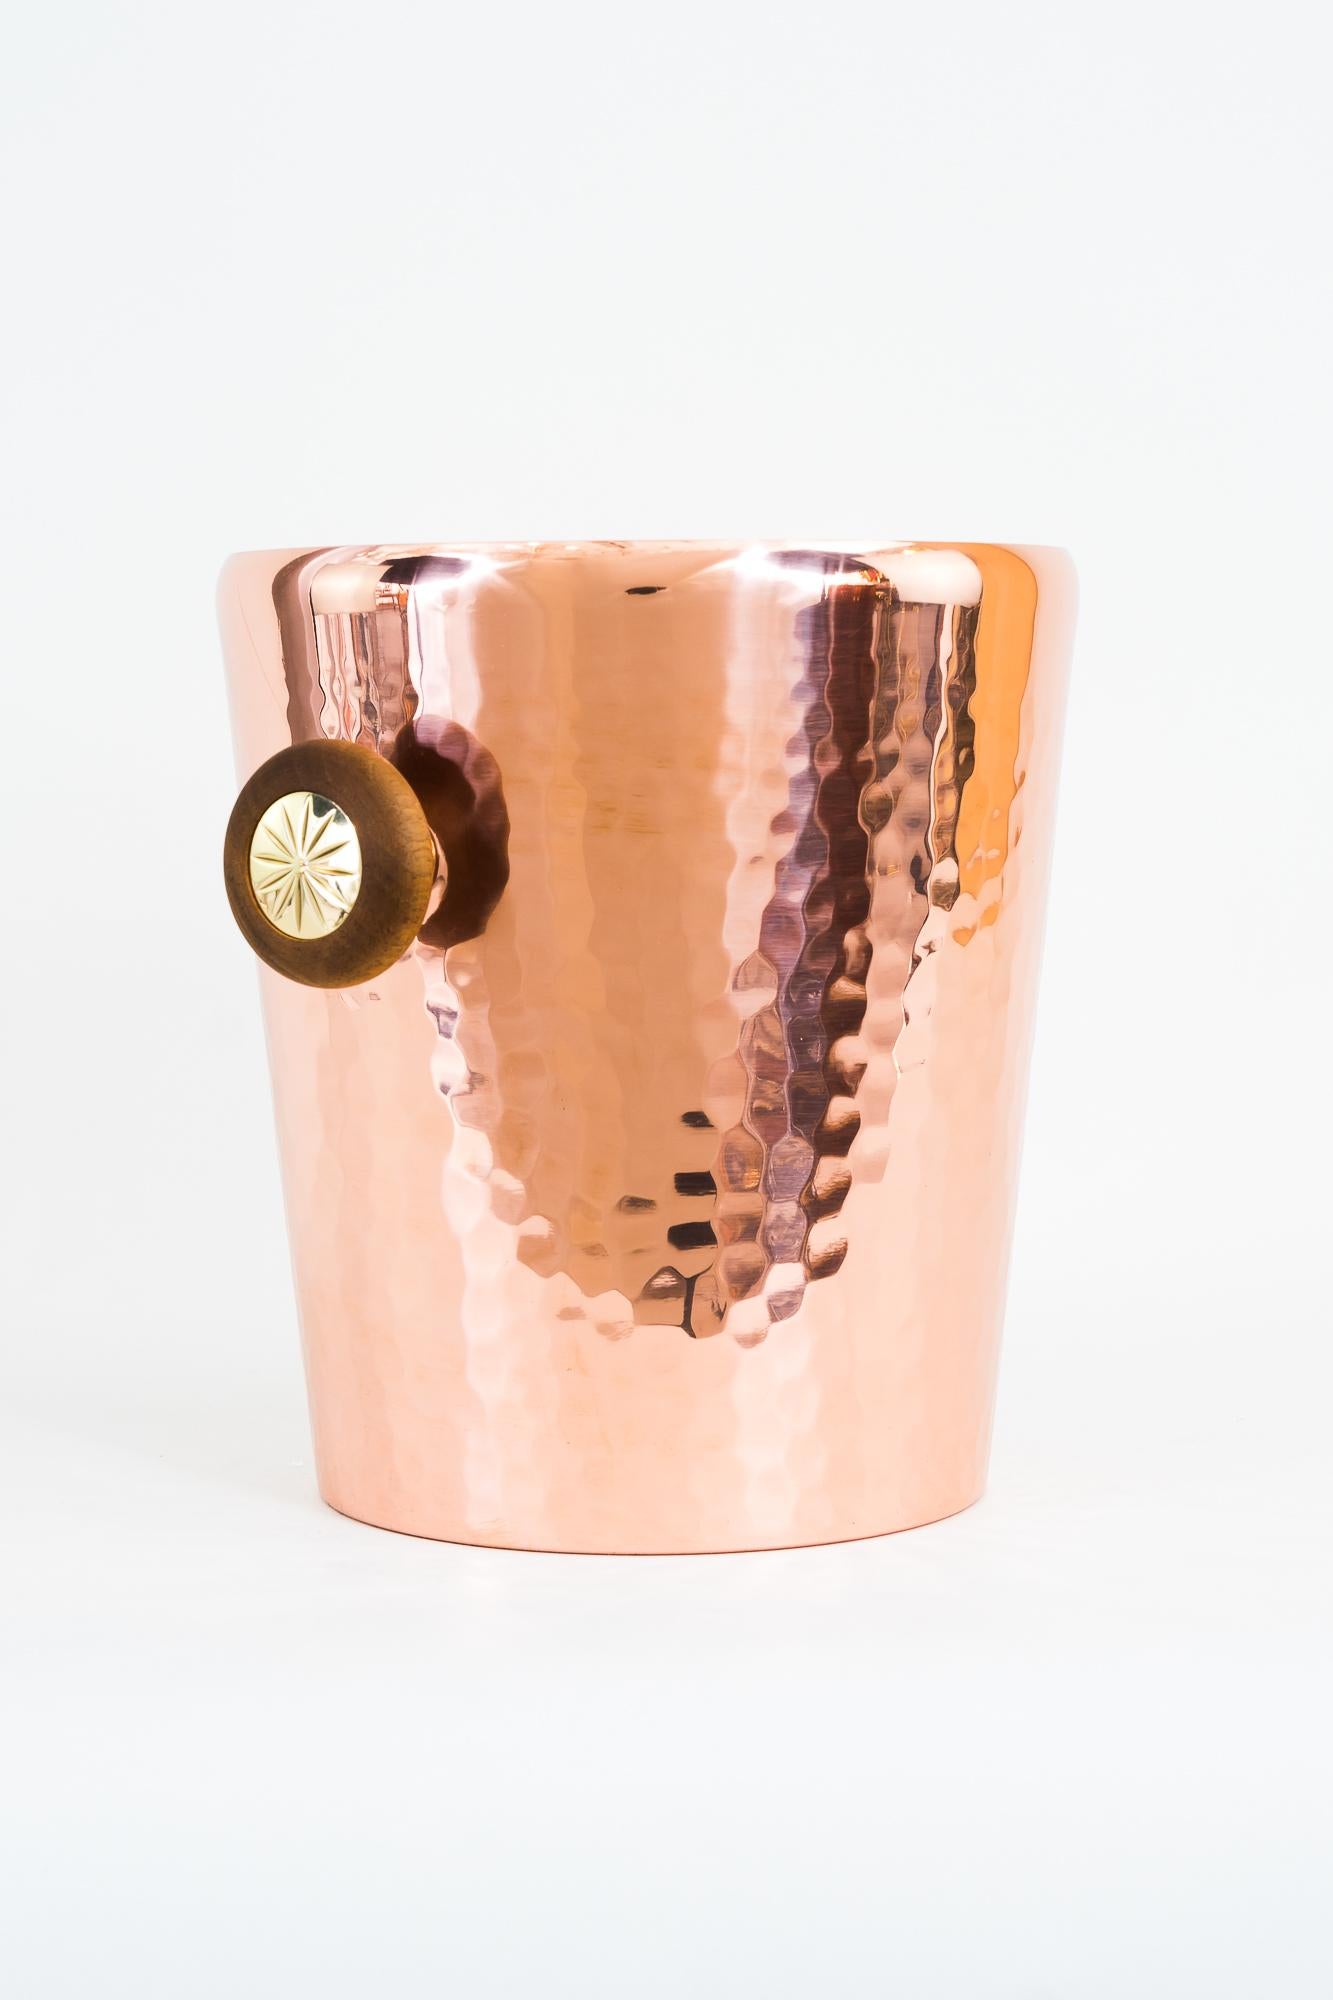 Champagne cooler, Vienna, 1950s
Hammered copper 
Brass and wood 
polished and stove enameled.